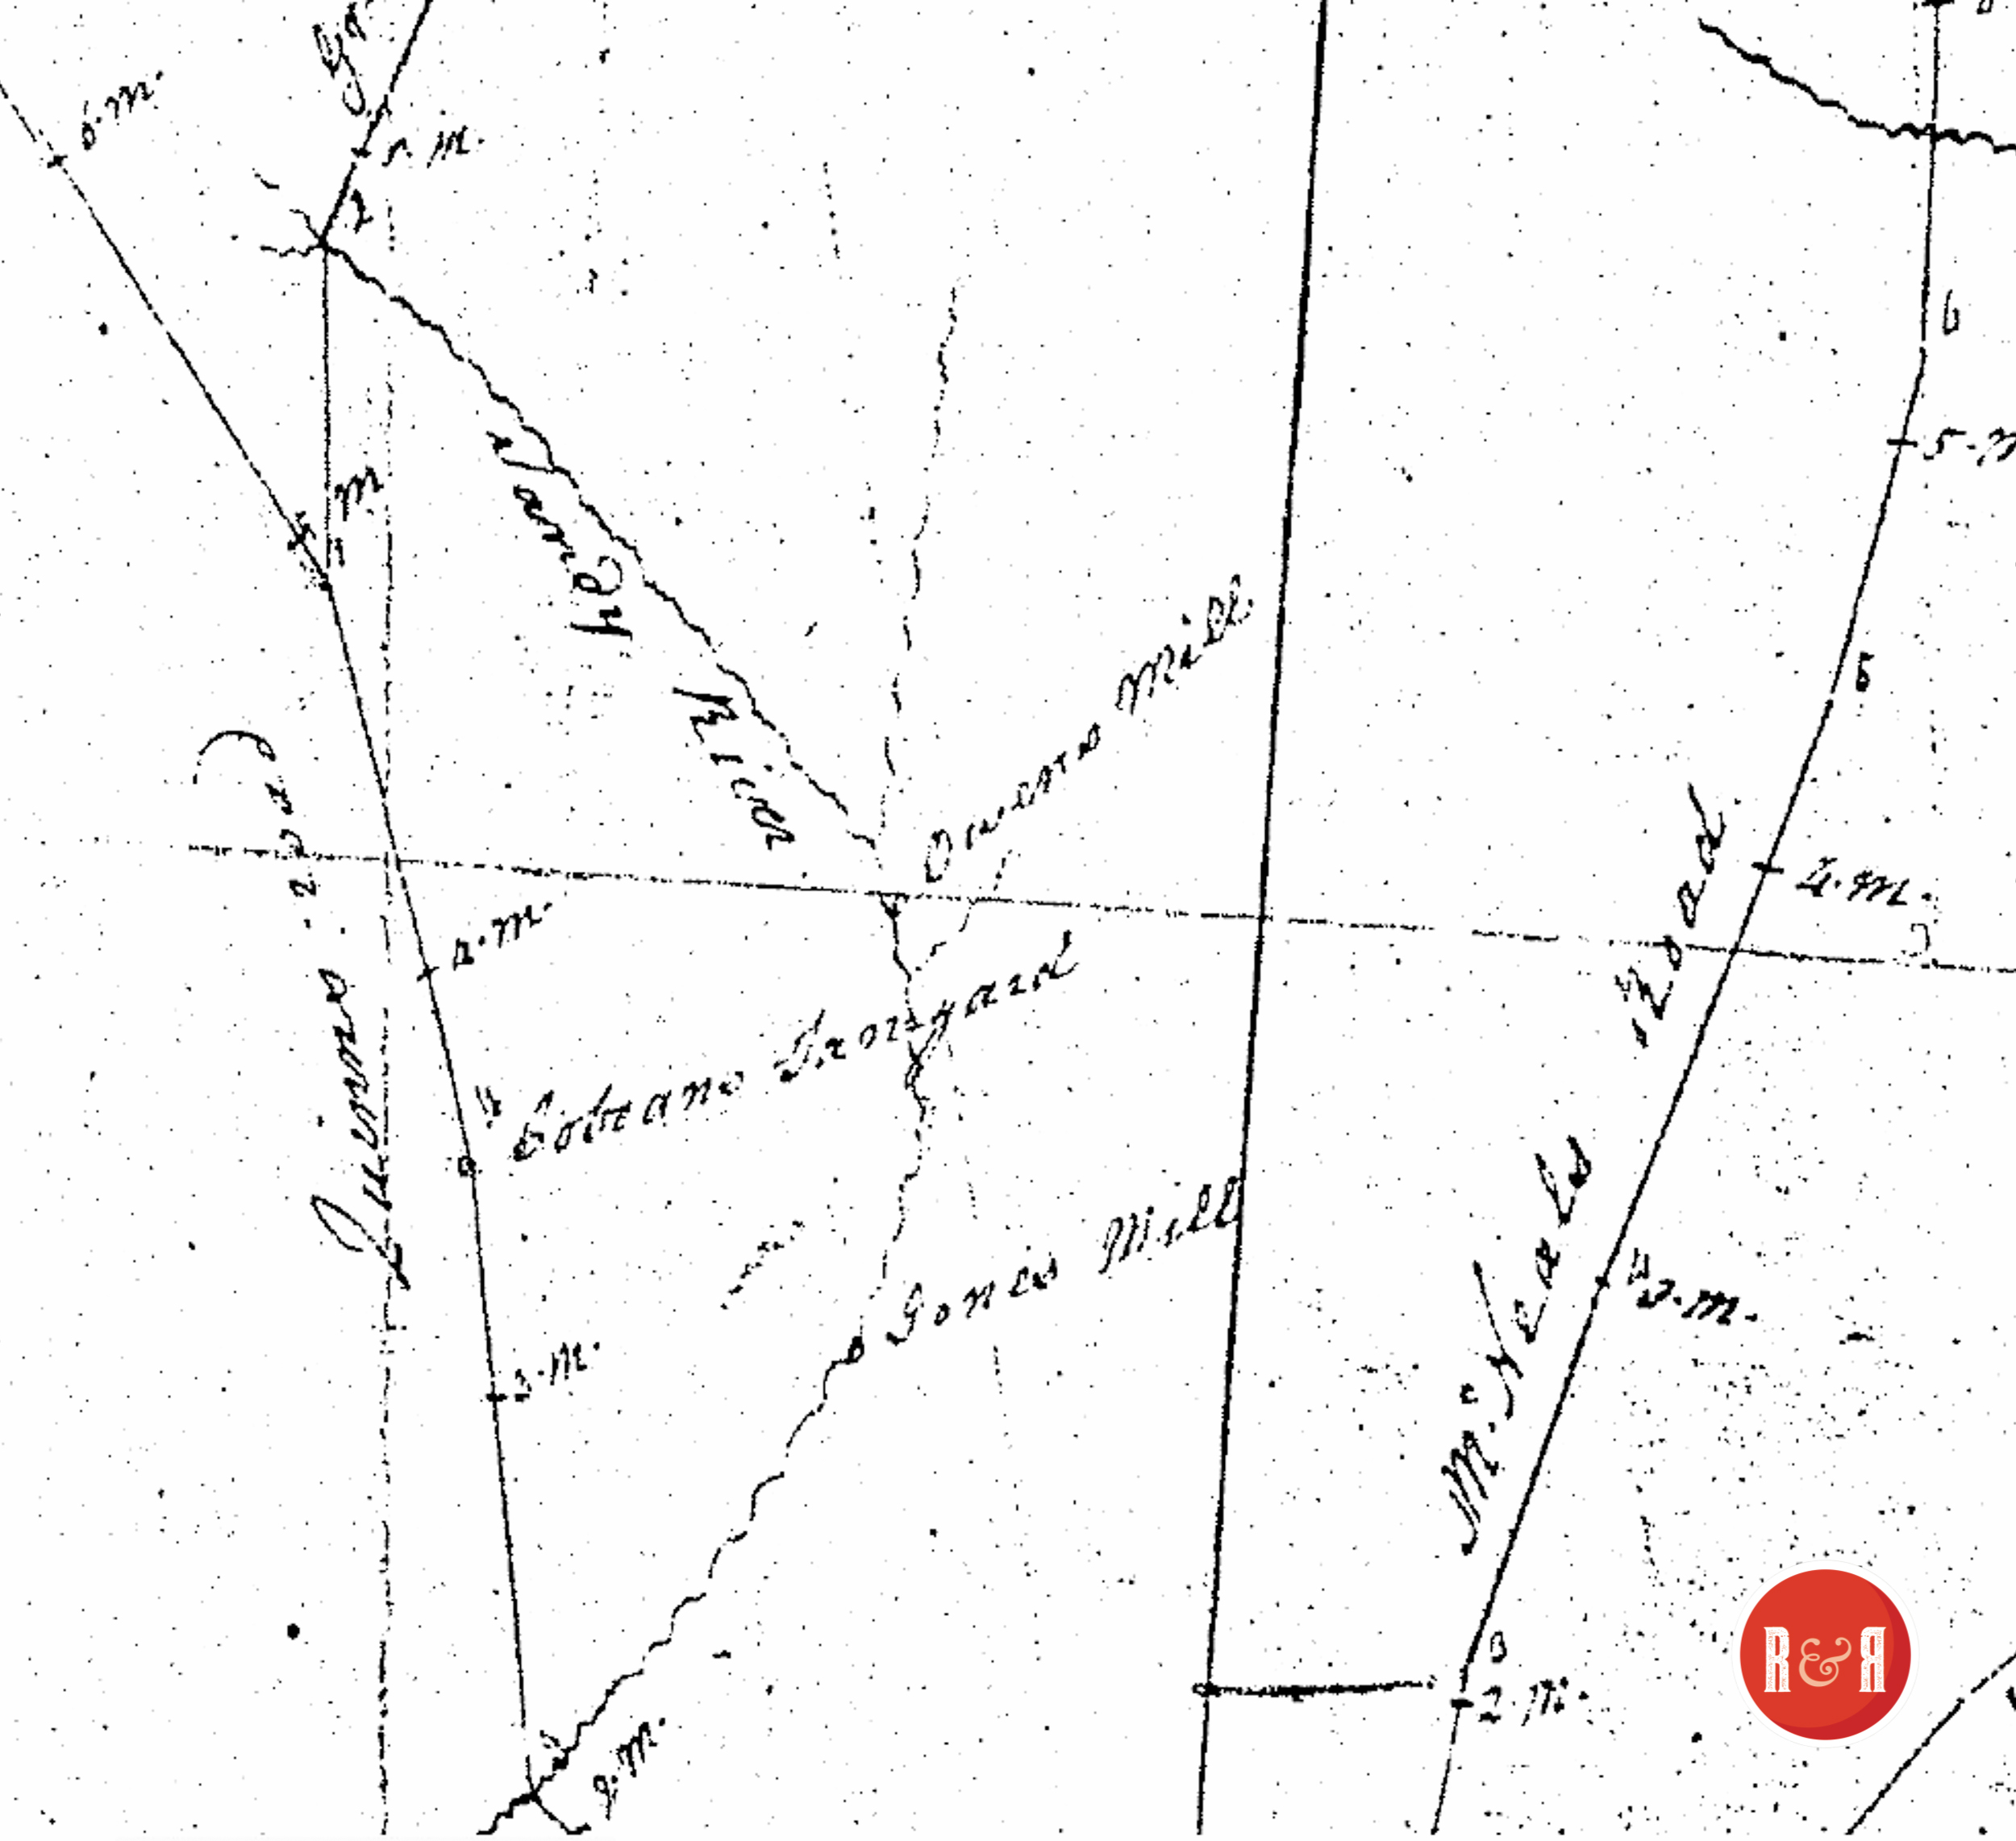 ENLARGEABLE BOY'S 1818 MAP SHOWING McNEALS - McNEIL'S ROAD